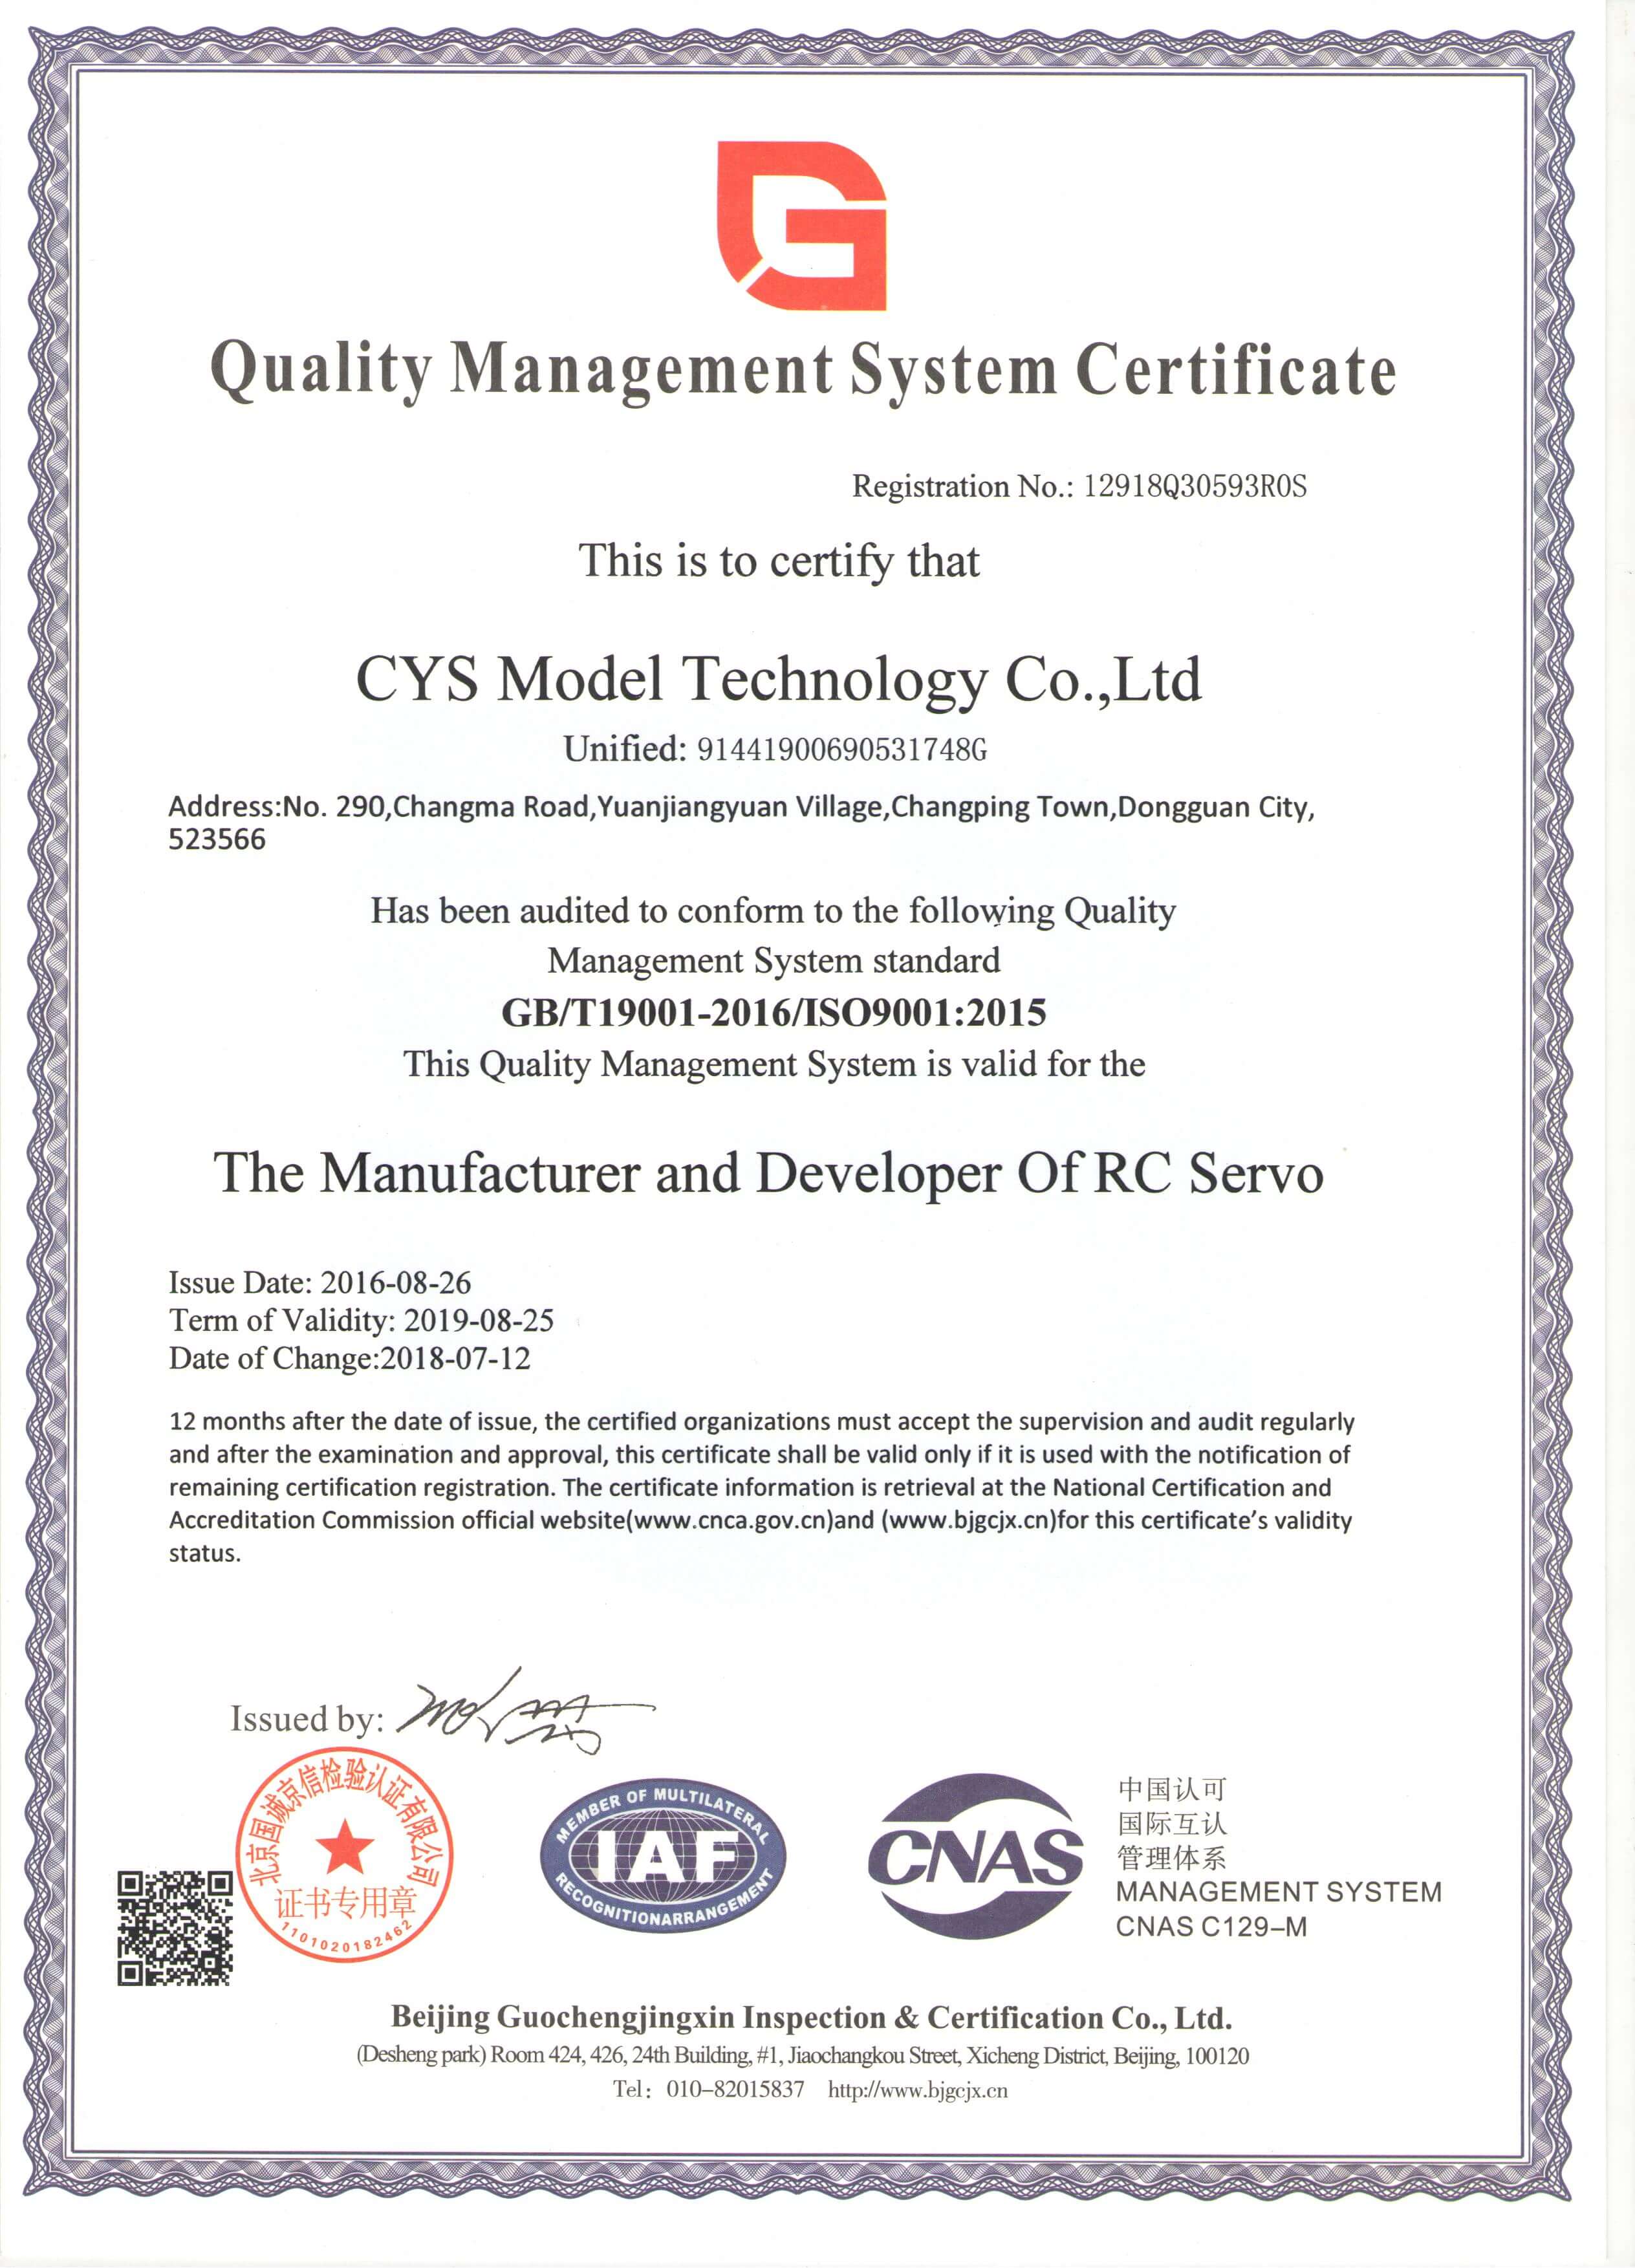 Quality Management System Certificate ISO 9001 ：2015